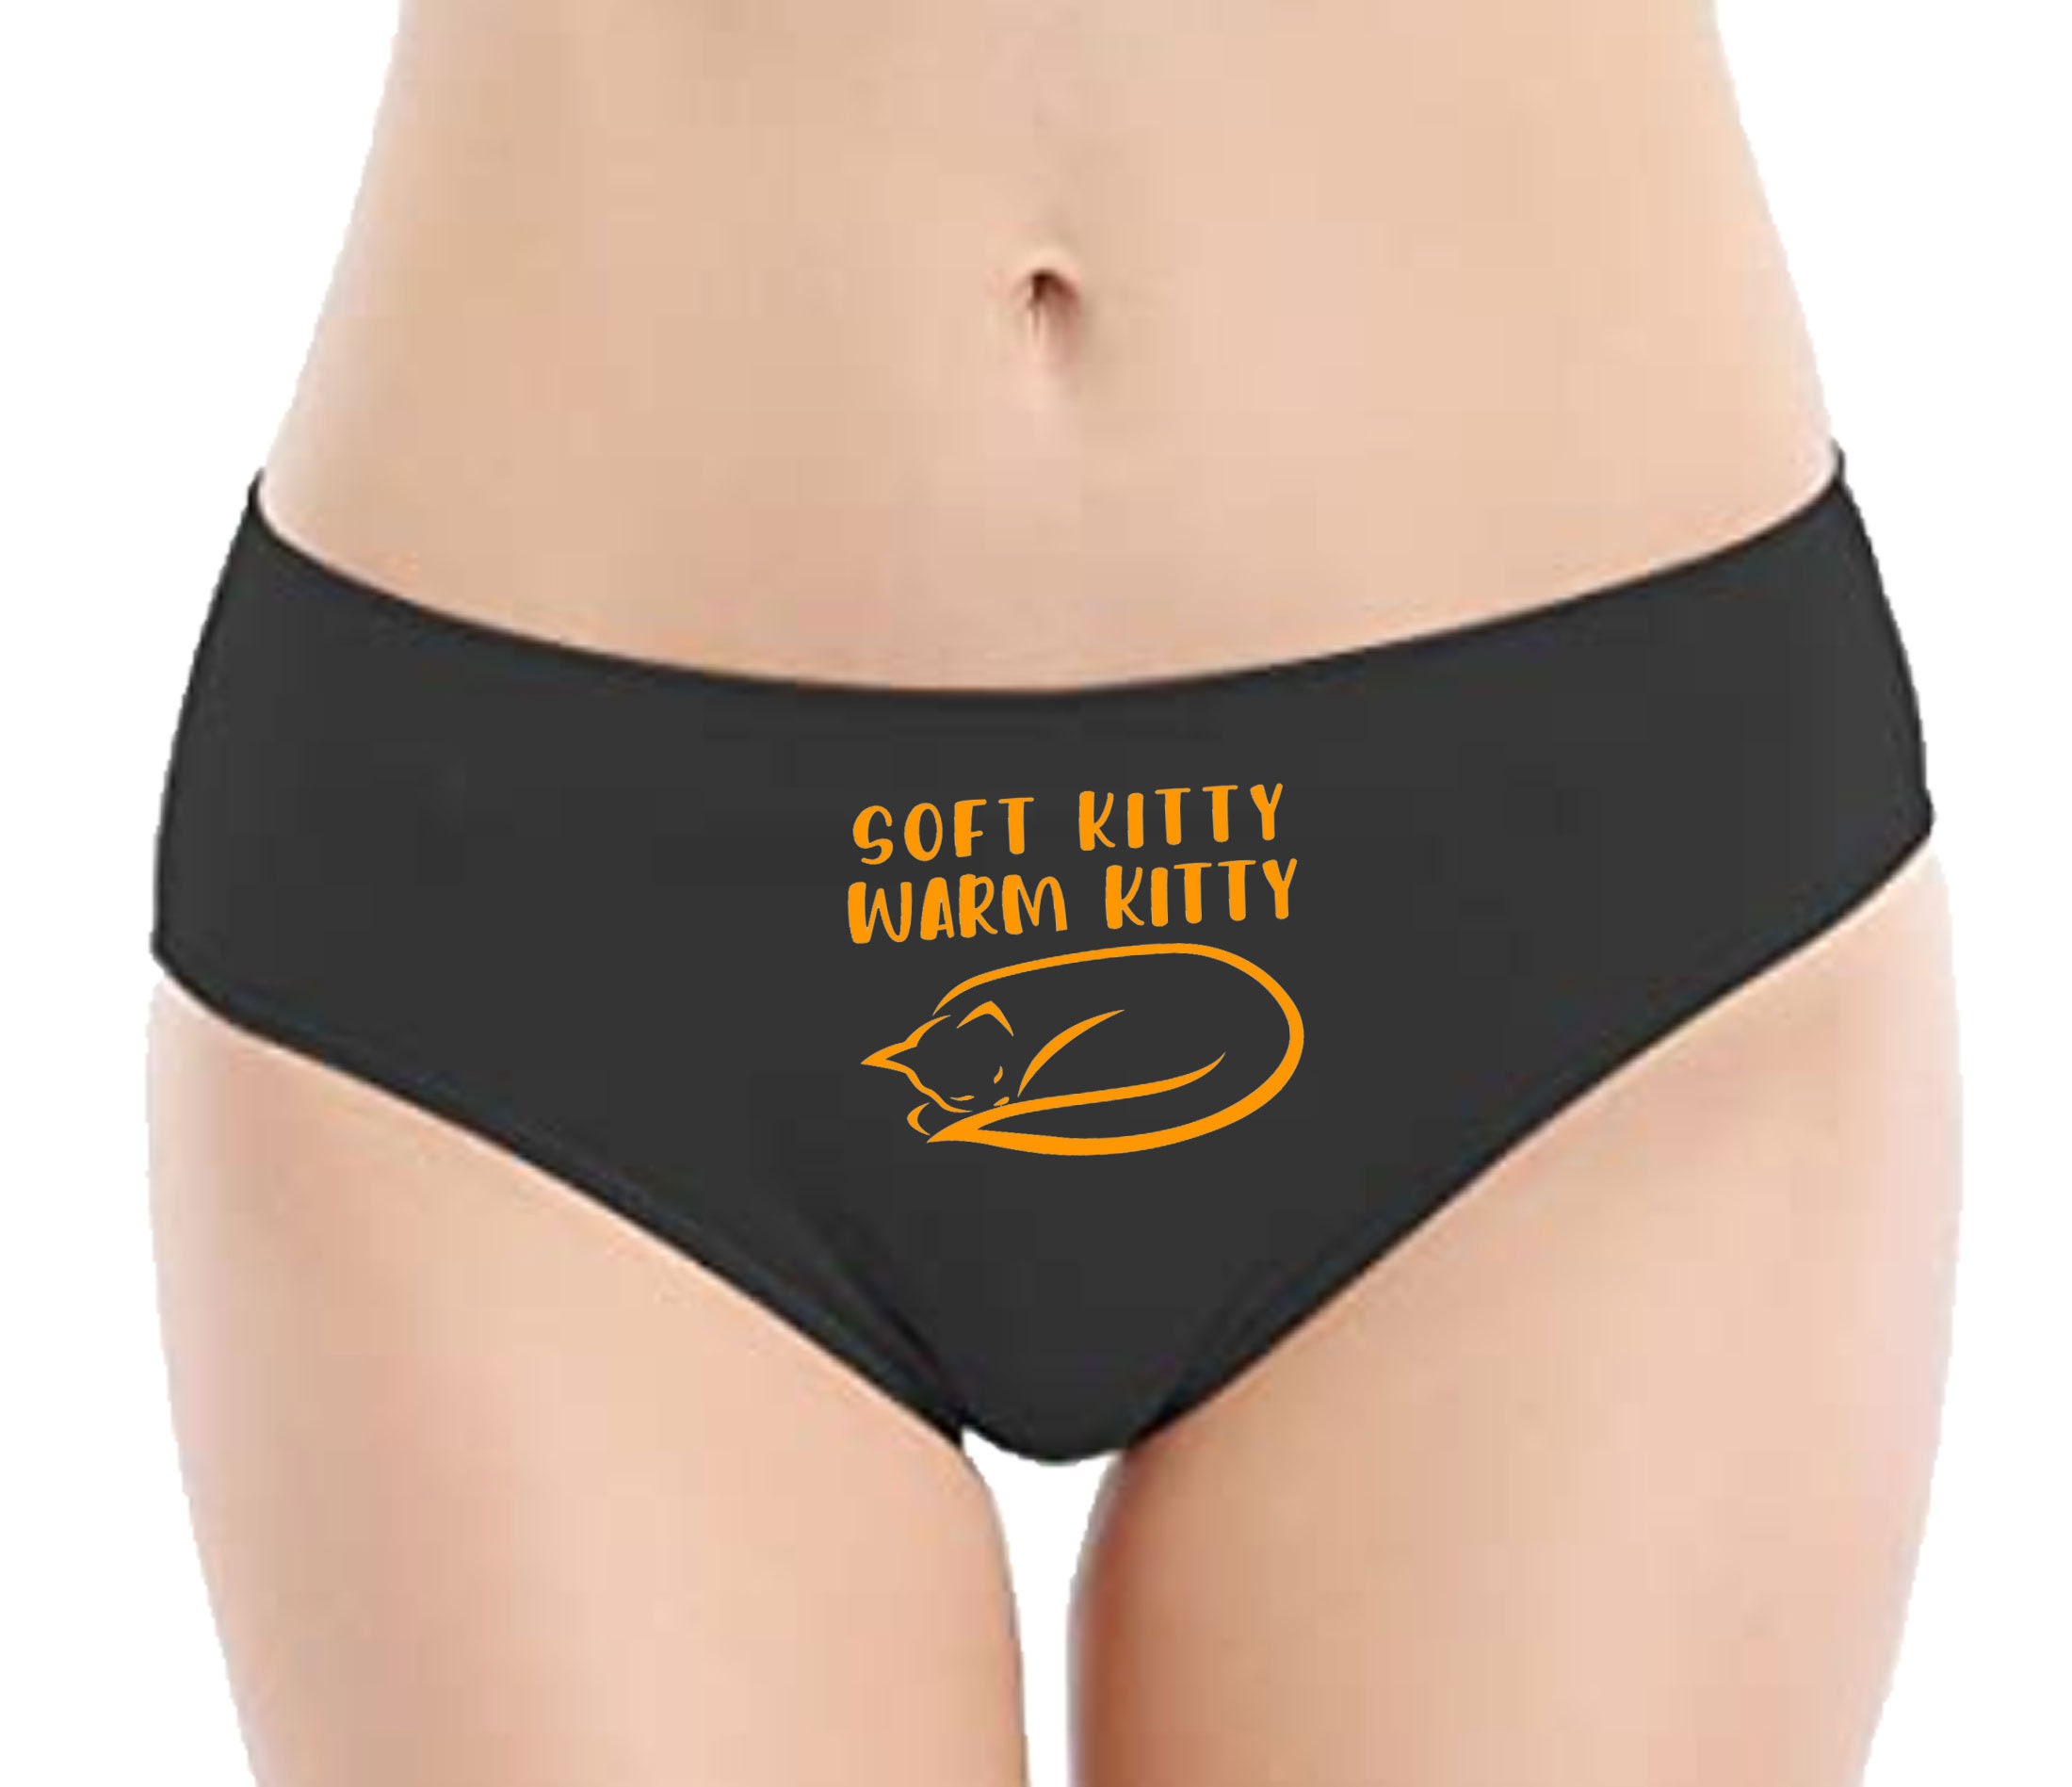 Naughty Panties for Her, Soft Kitty Warm Kitty Undies, Funny Rude Hipster  Panty, Hilarious Anniversary Birthday Gift for Wife Girlfriend -  Canada